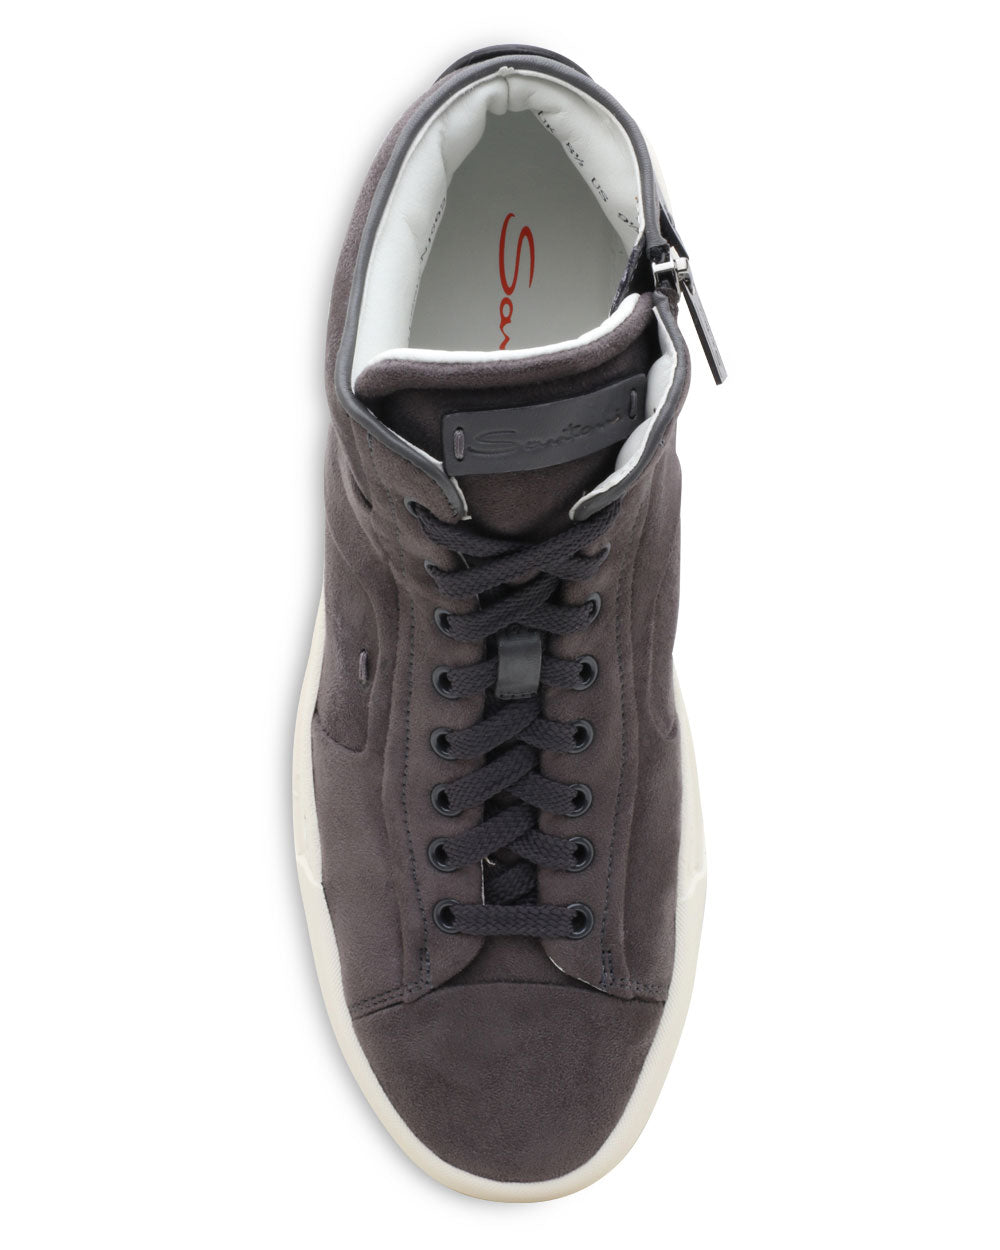 Greenson Mid Cut Lace Up Sneaker in Grey